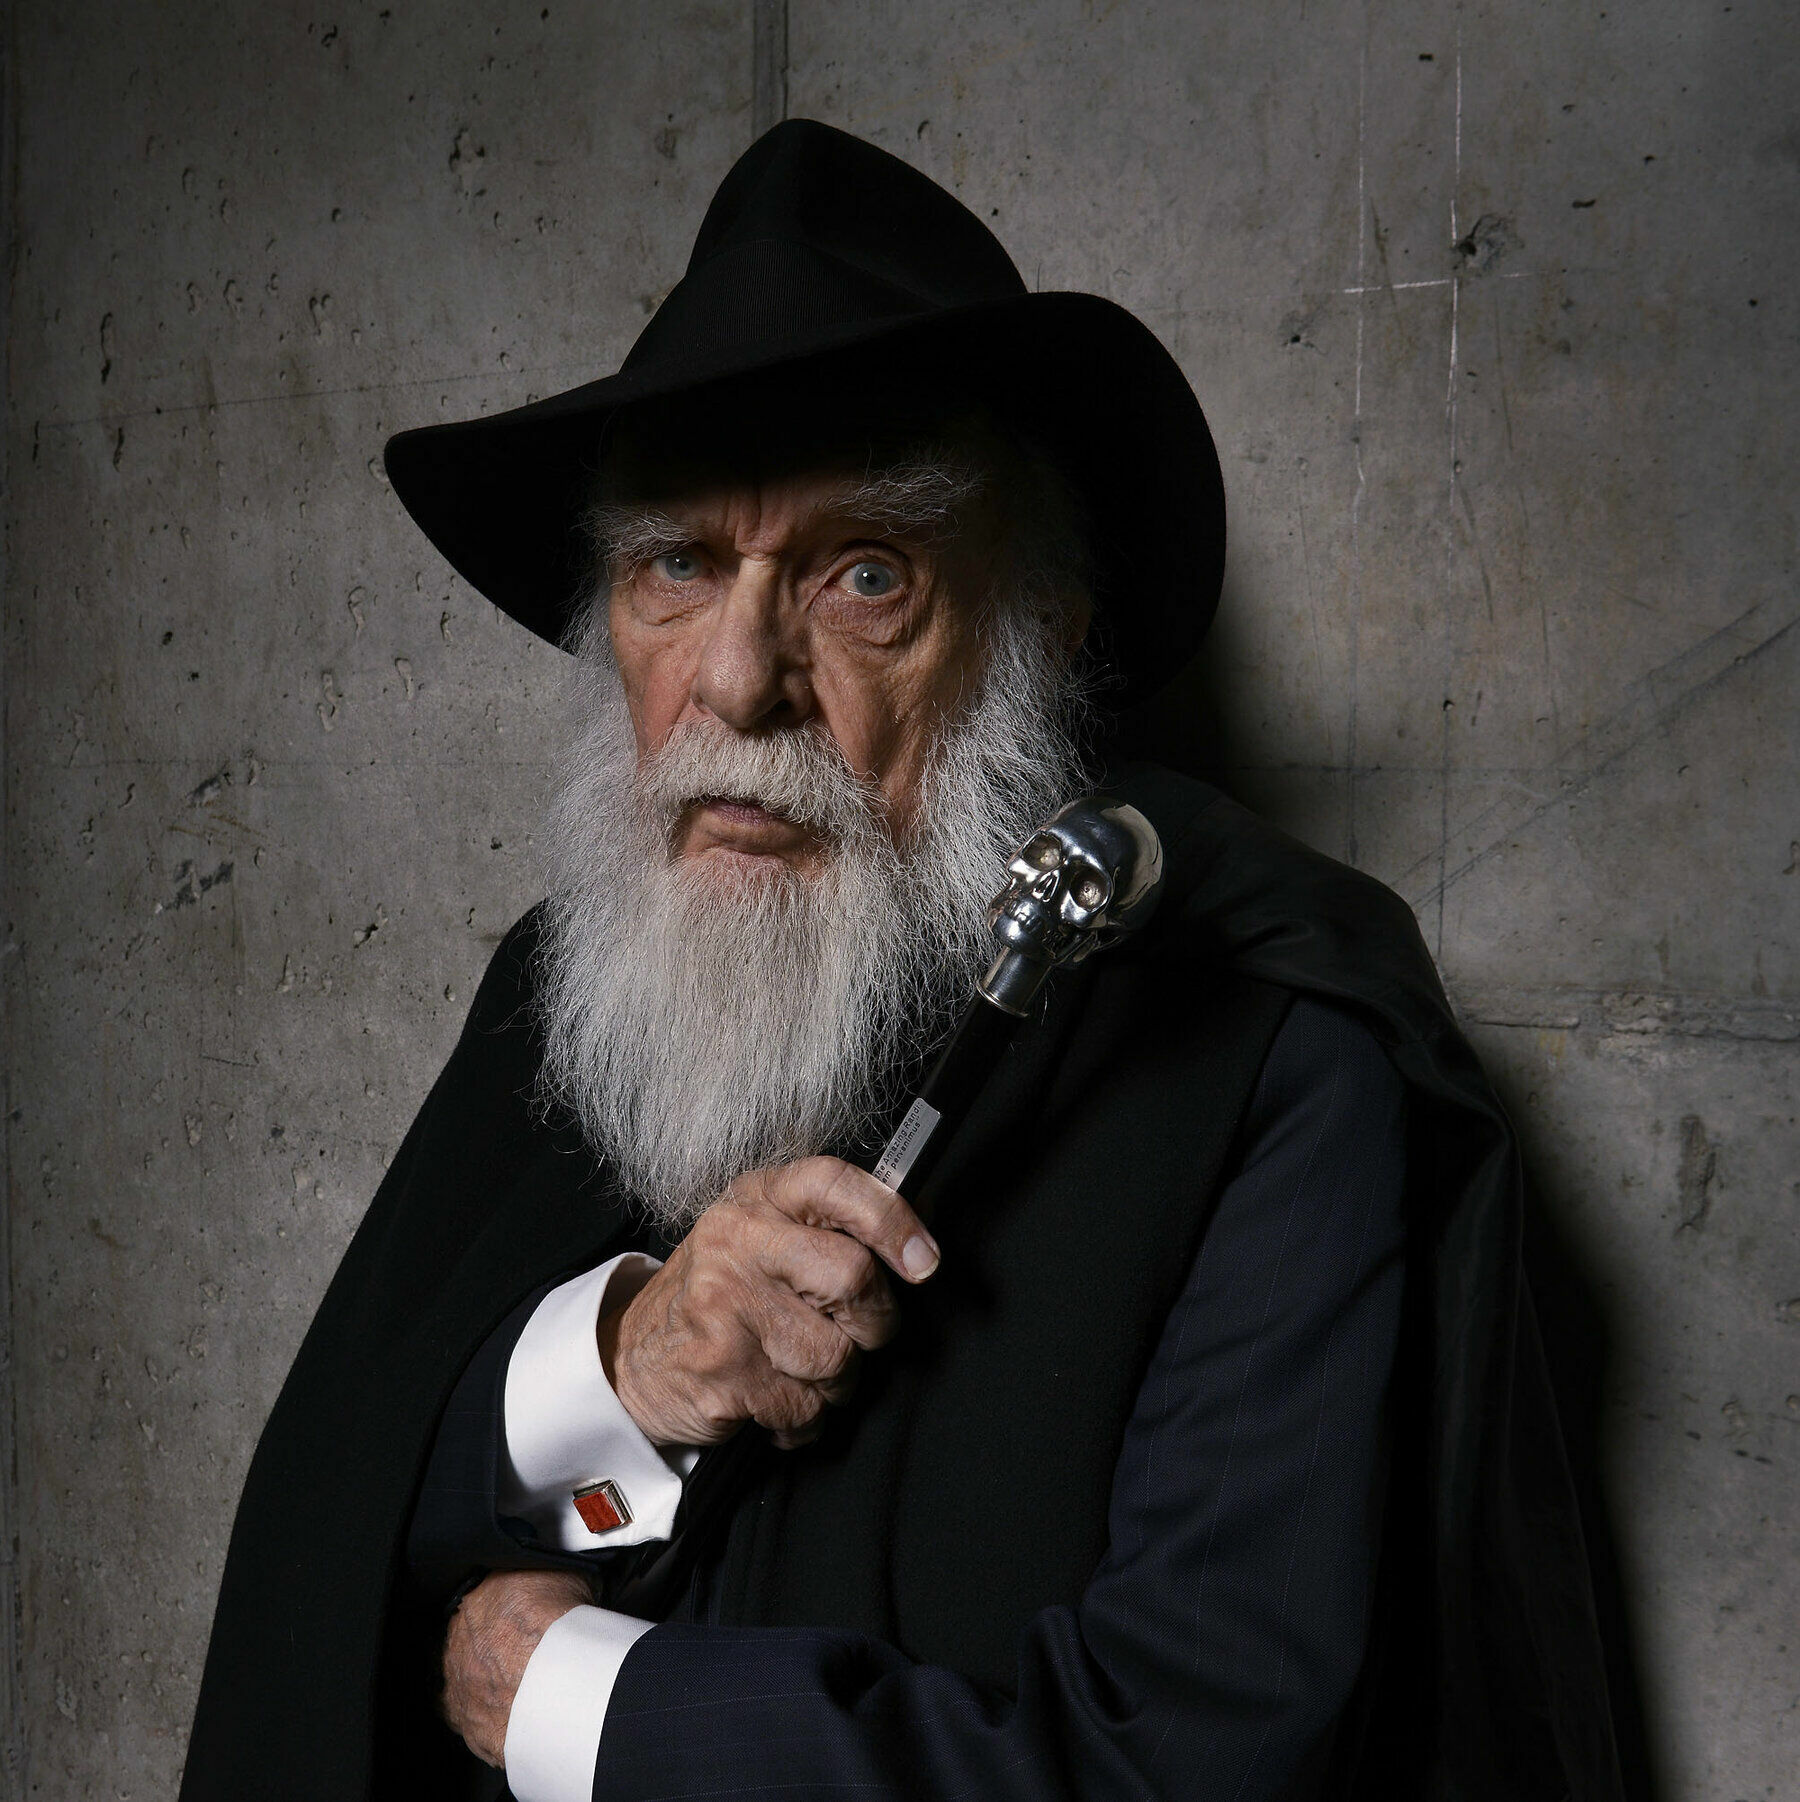 Farewell to Illusion Terminator! James Randi - the main fighter against charlatans died